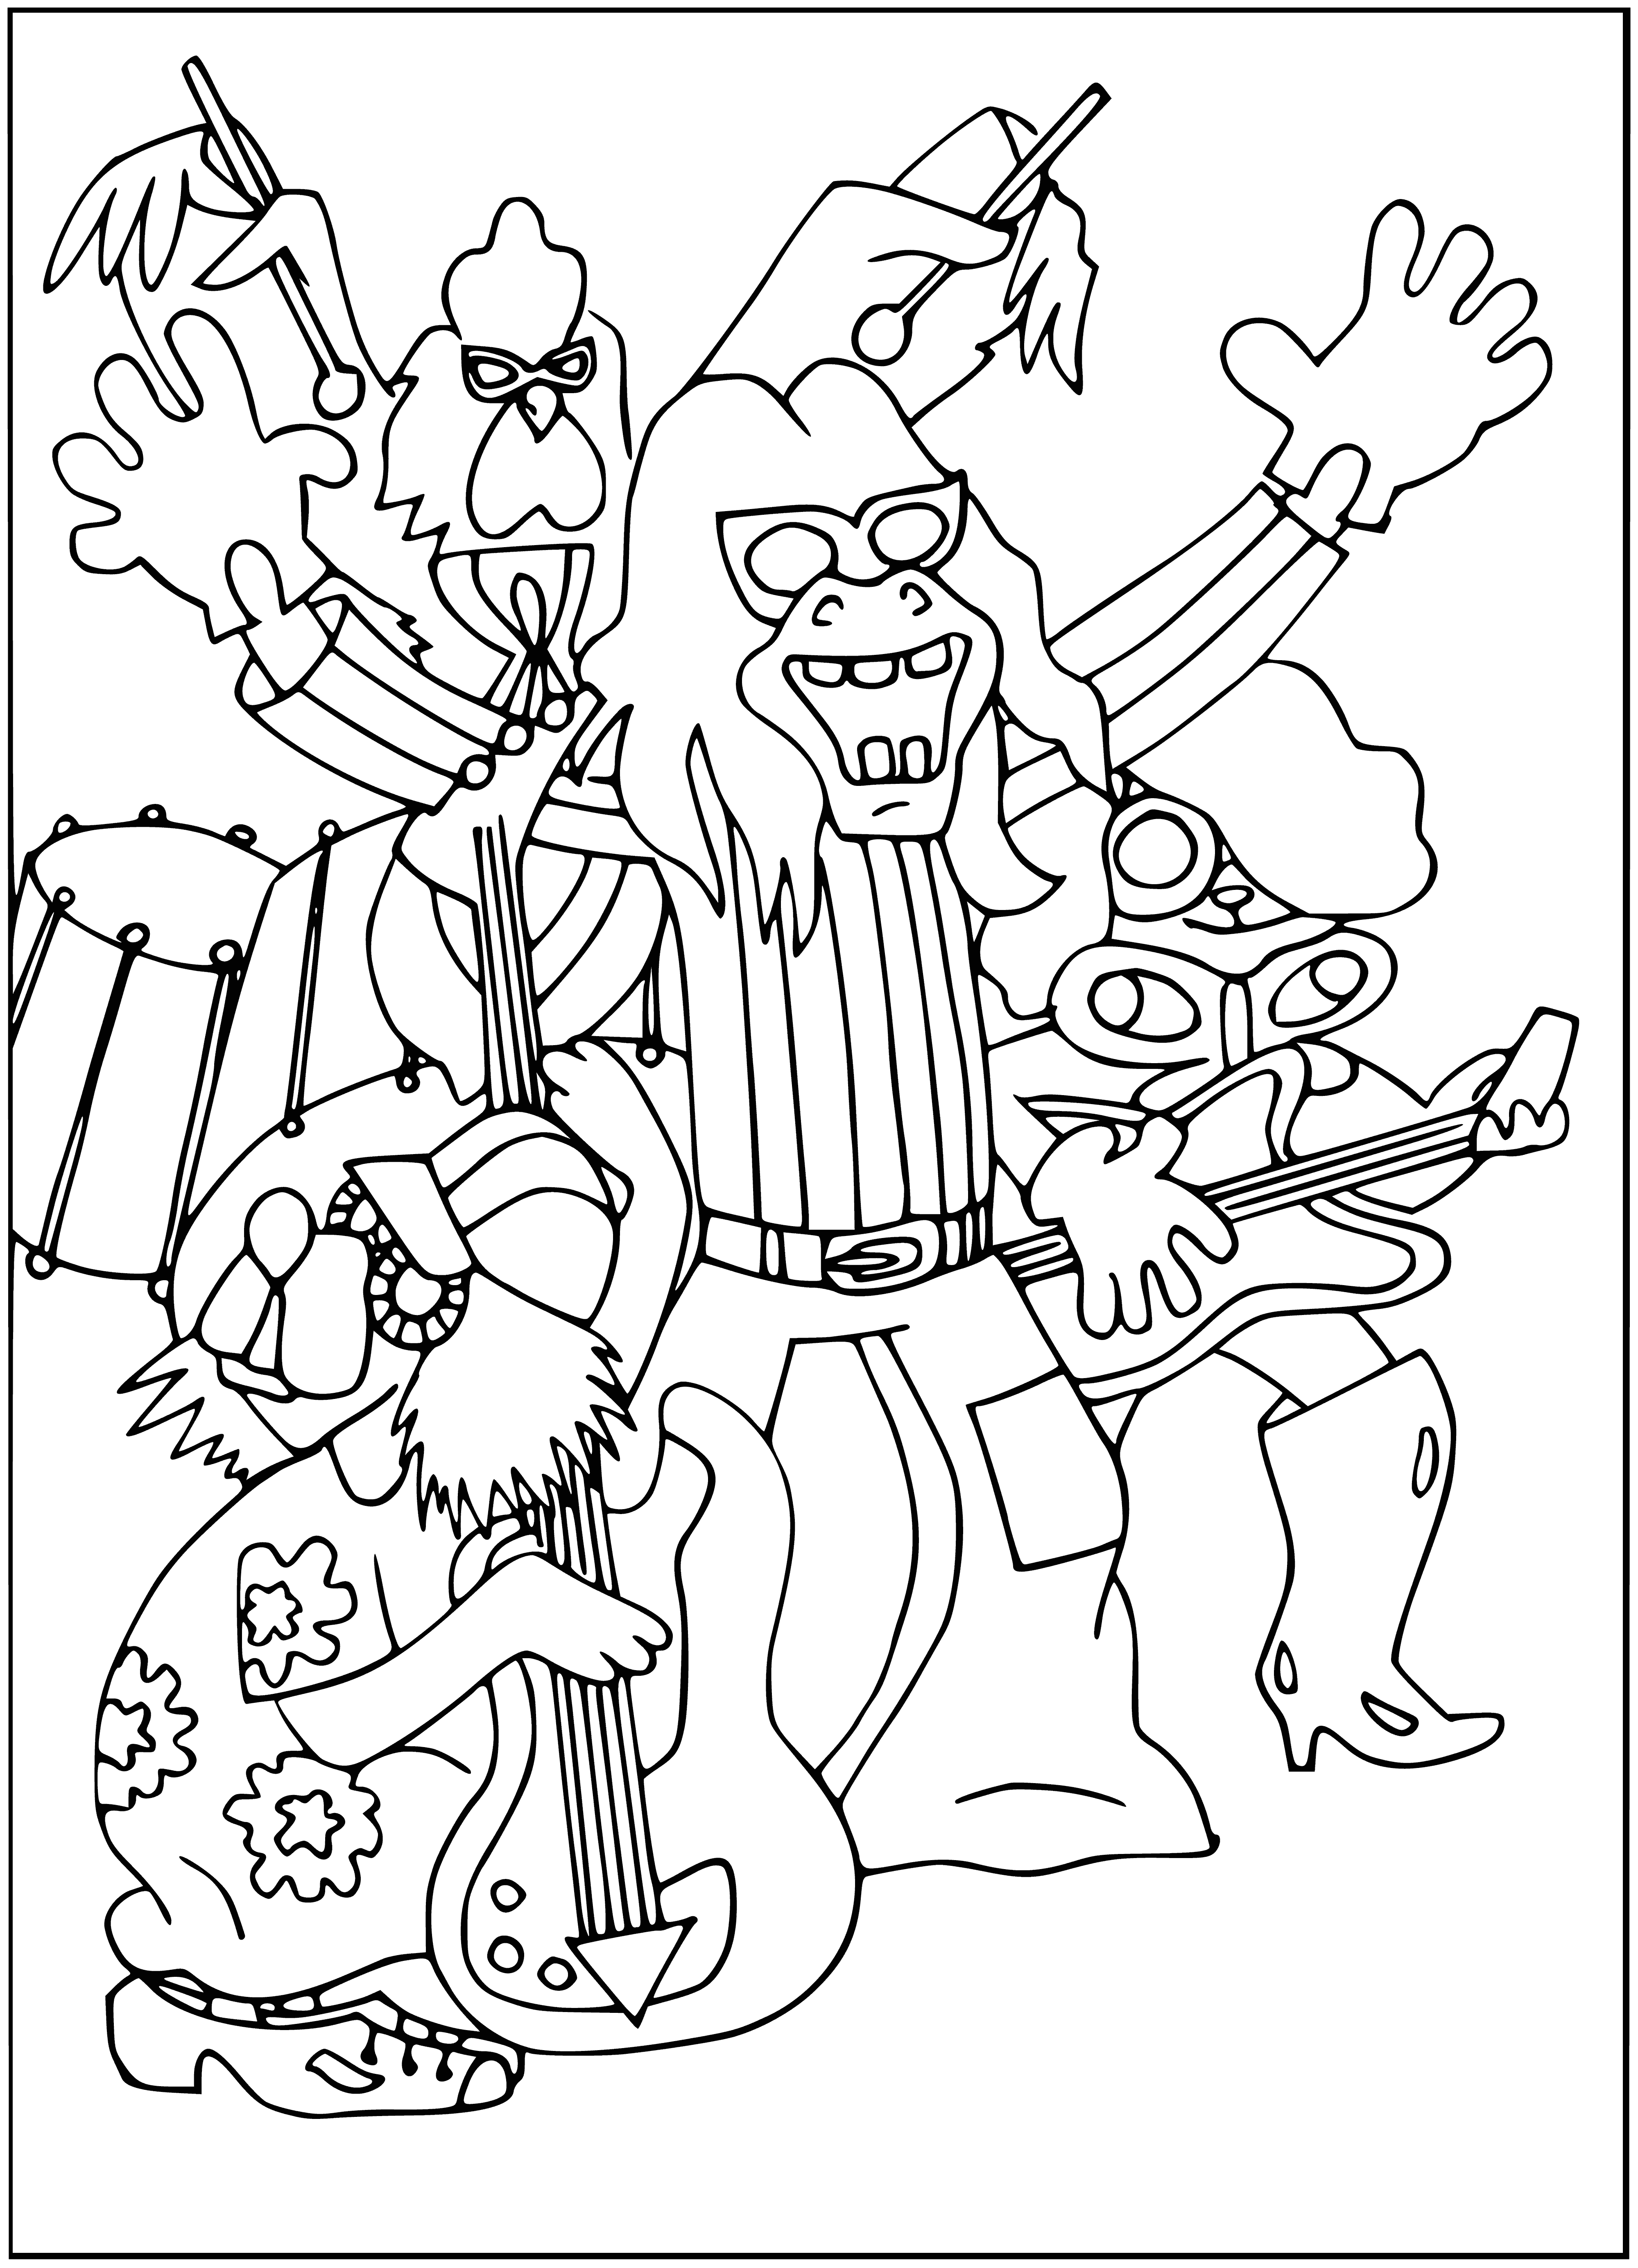 coloring page: Musical animals performing on stage: dog on drums, cat on guitar, rooster on keys, & donkey on sax. Adorably dressed, audience claps & cheers.